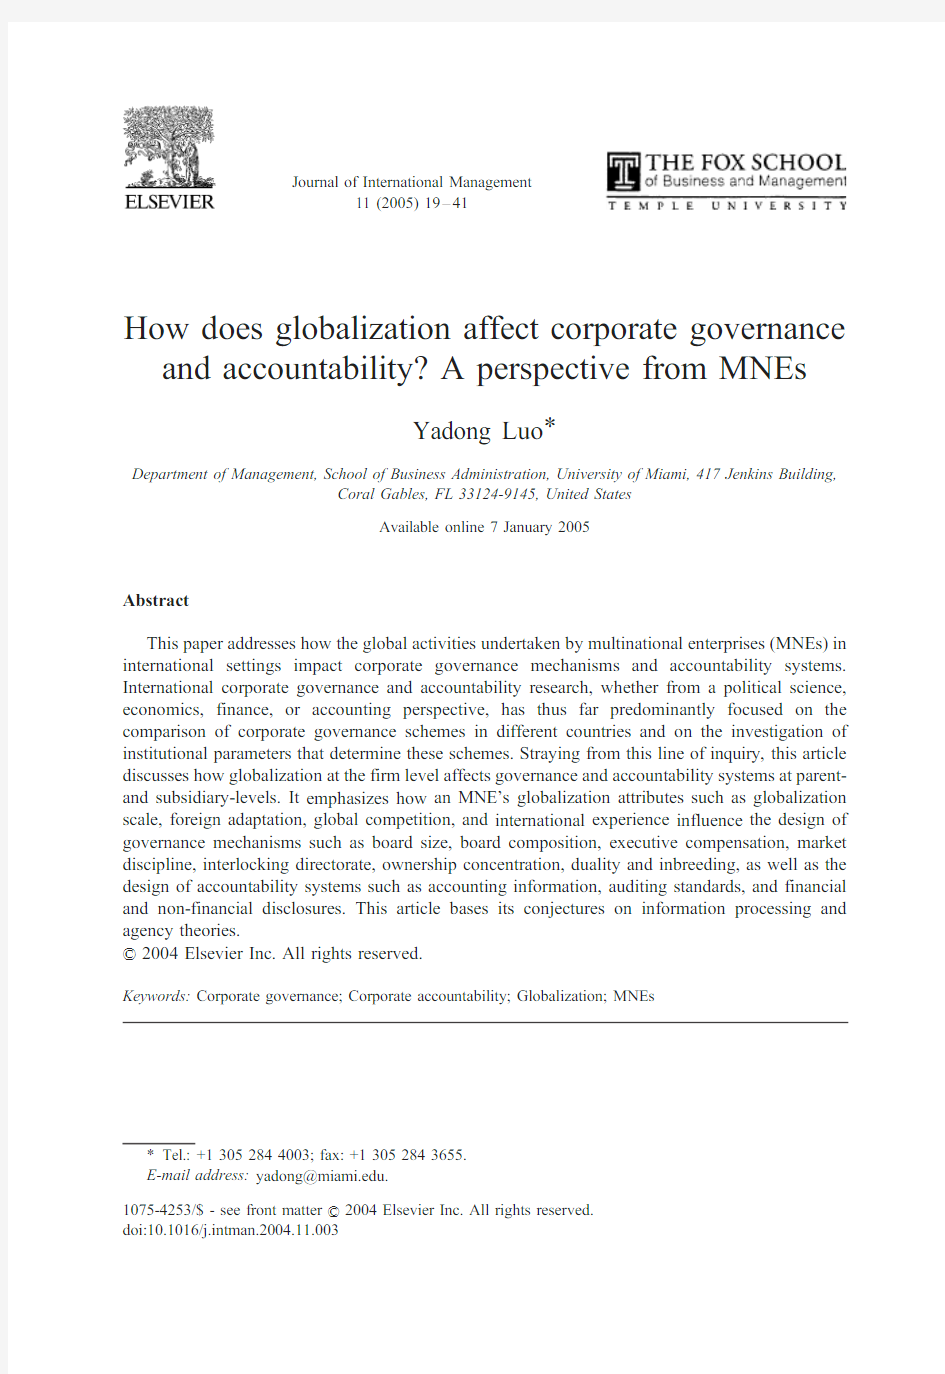 How does globalization affect corporate governance and accountability